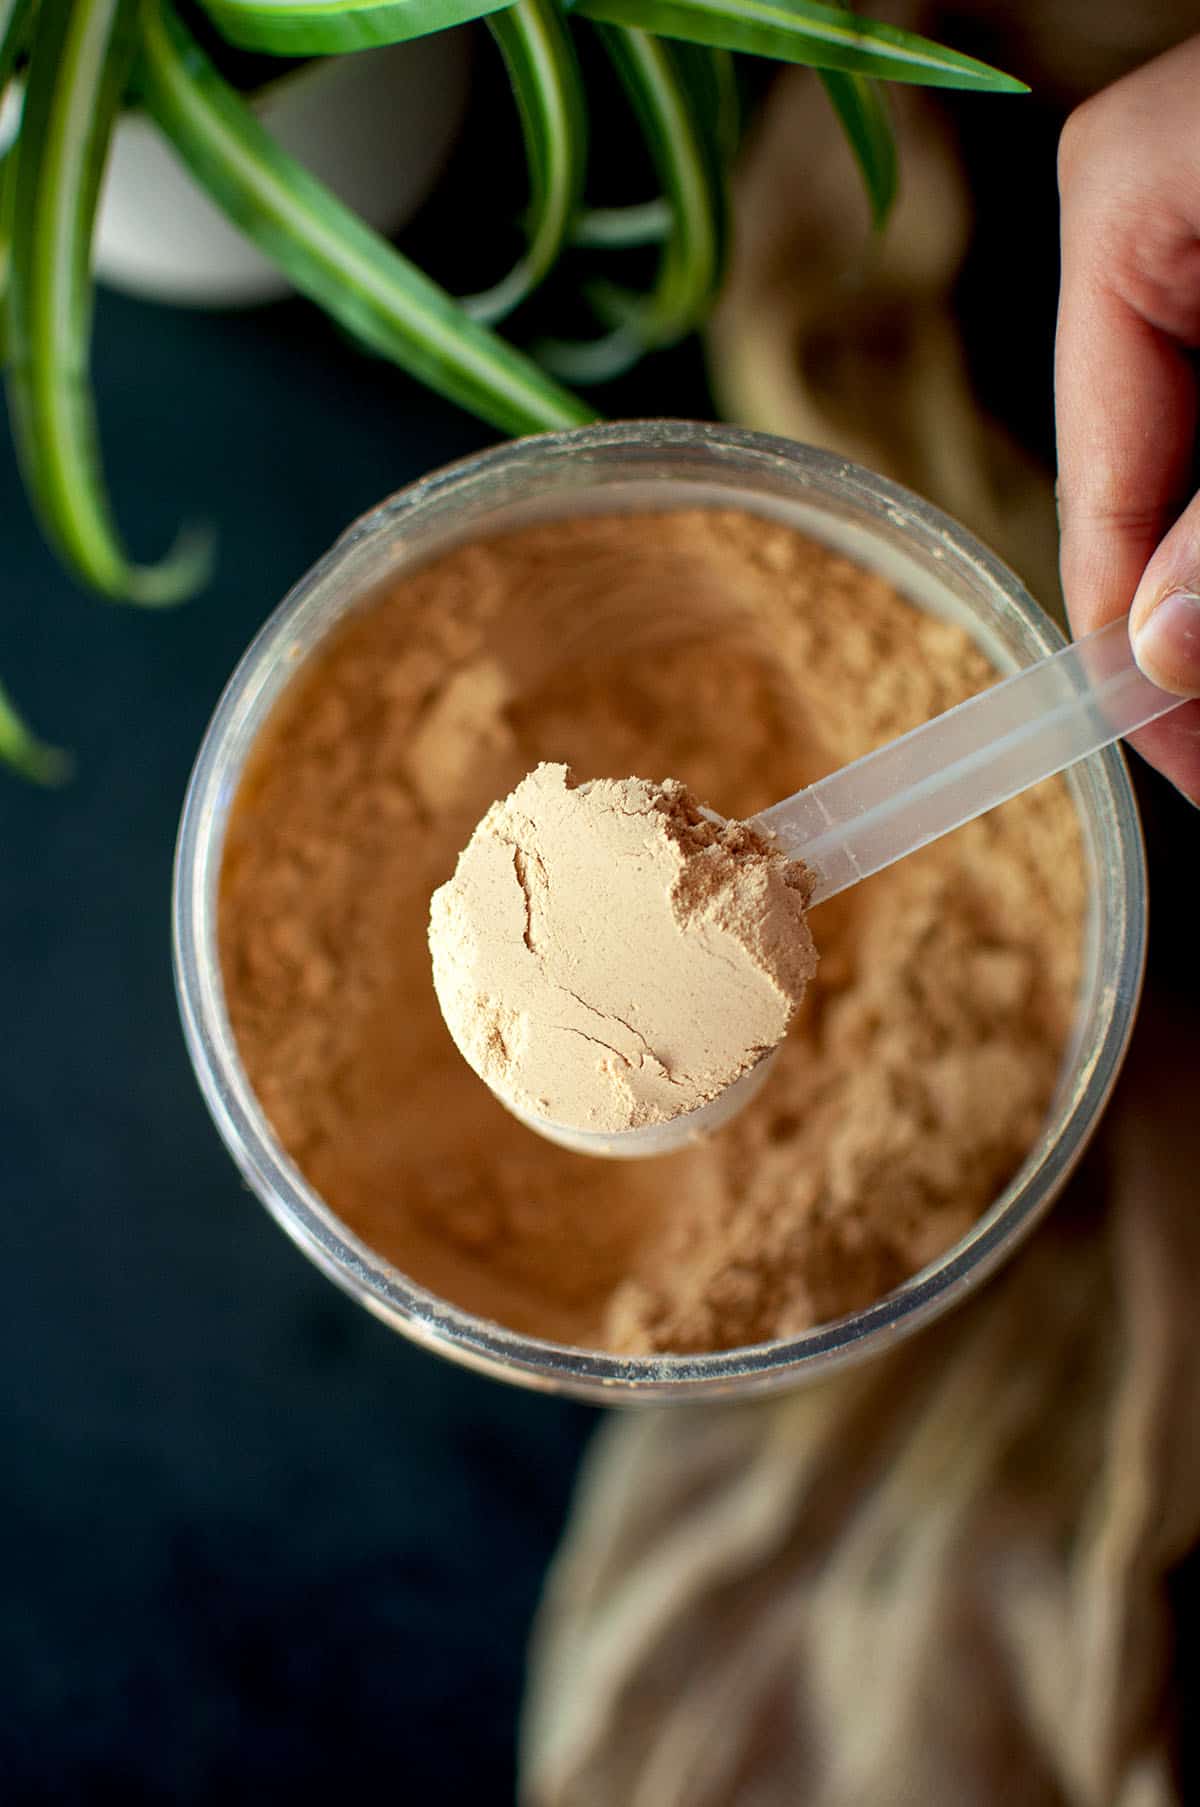 Hand holding a scoop with powder peanut butter.